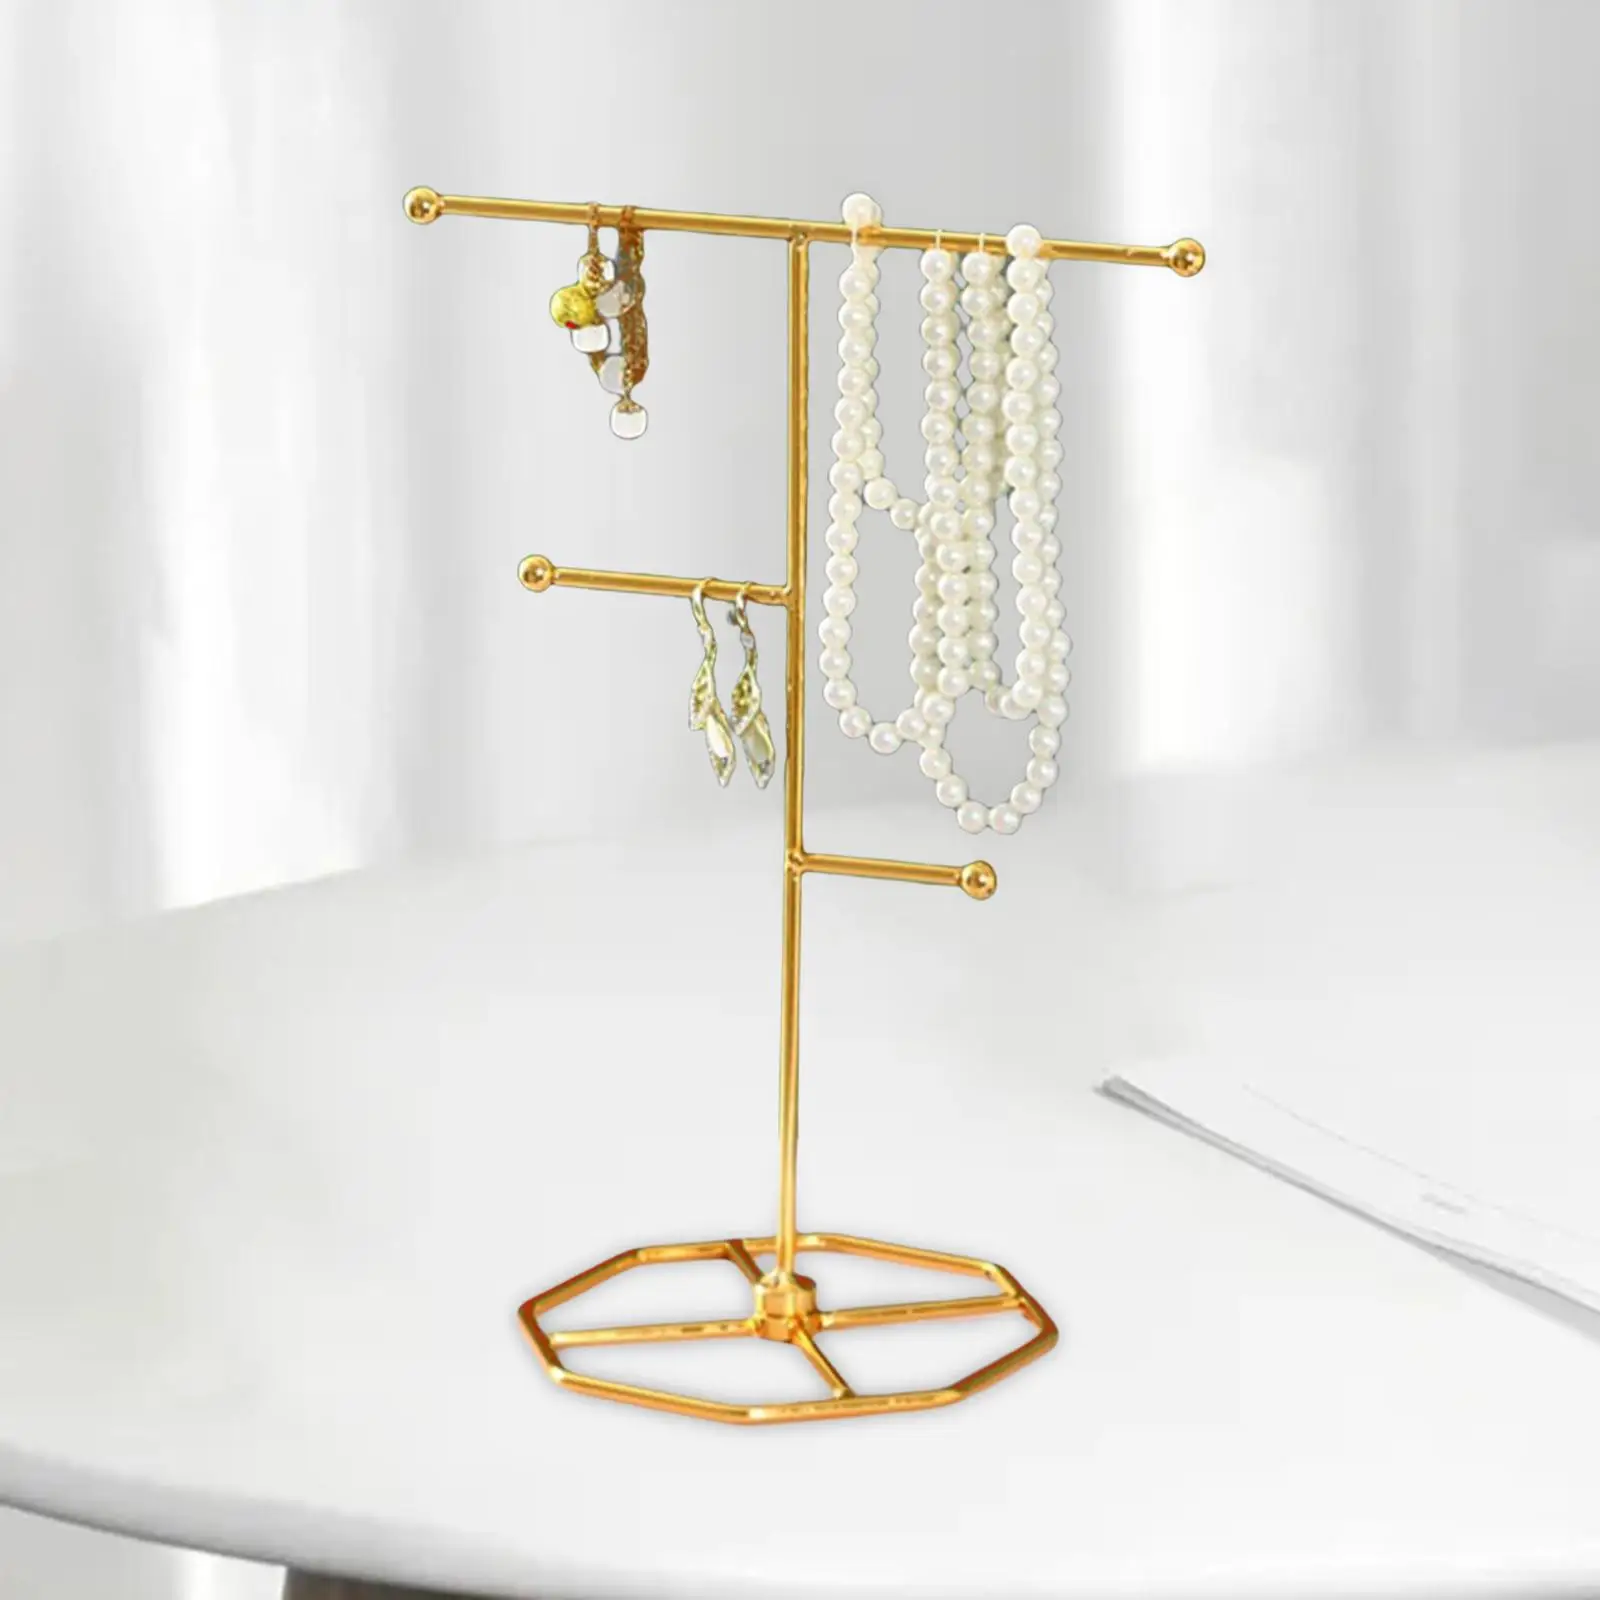 Metal Jewelry Organizer Free Standing Hanger Home Decors Ornament Earring Display Stand for Chains Bracelet Vanity Table Closet